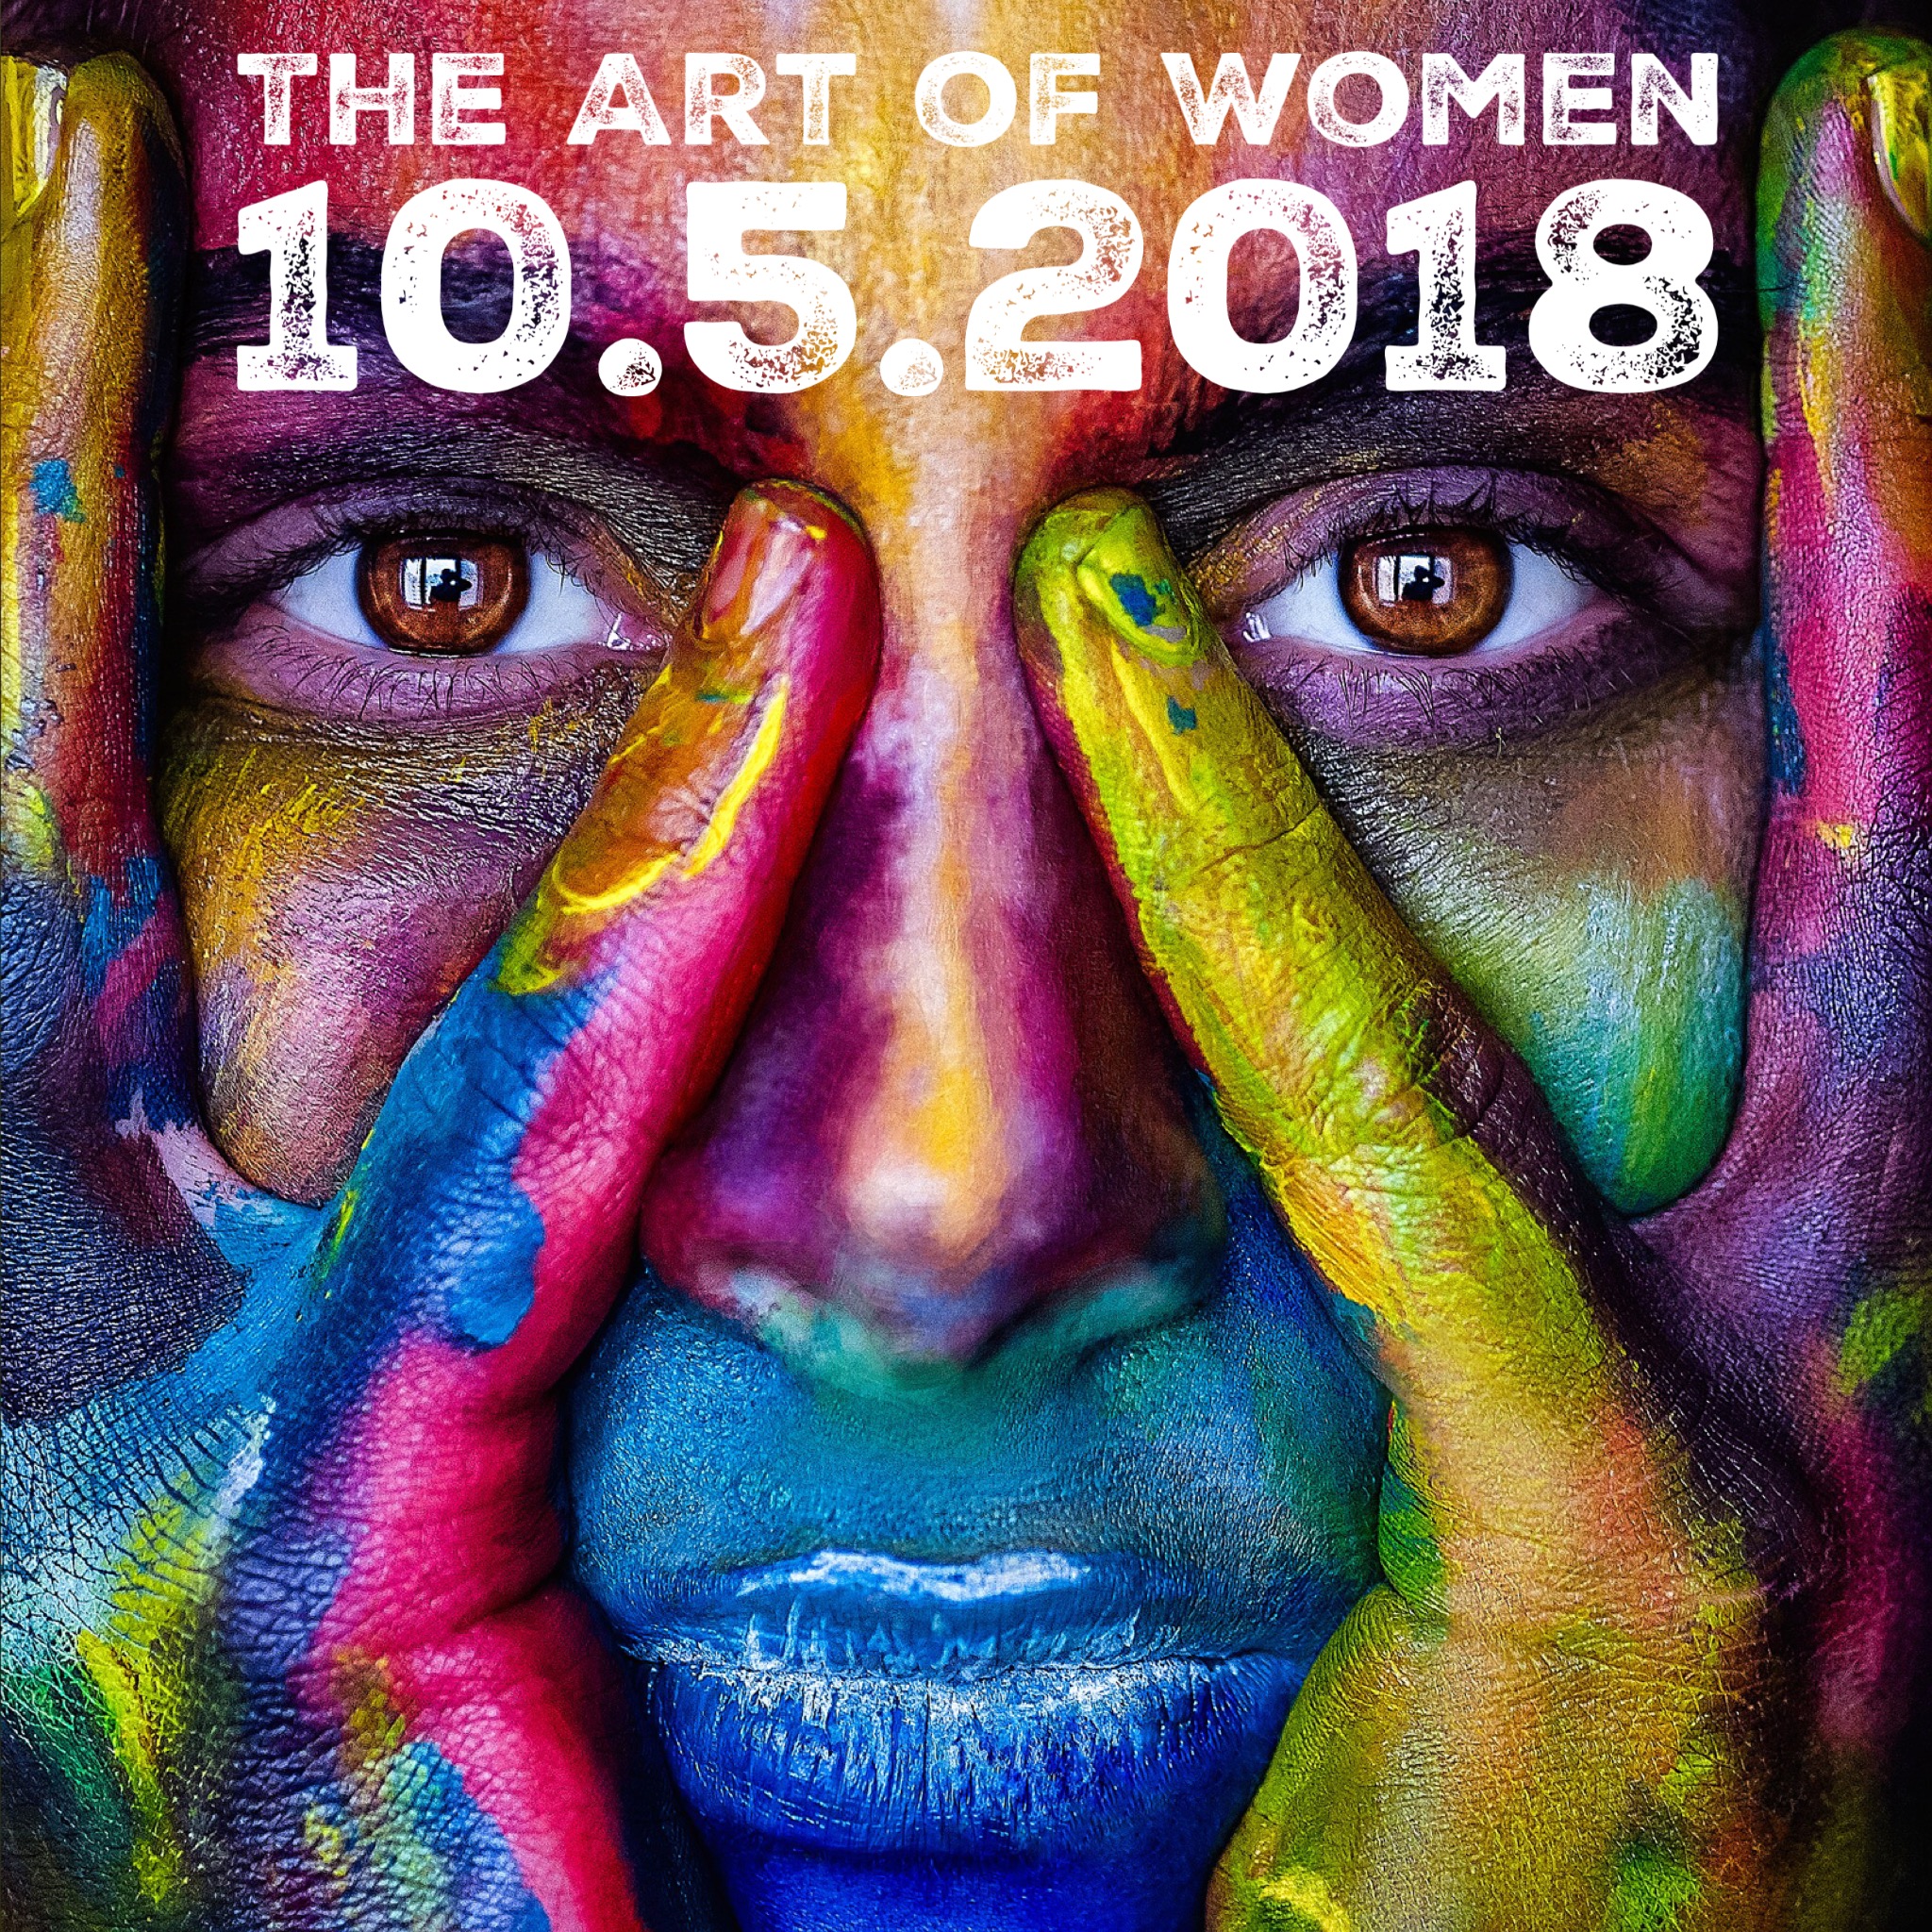 The Art of Women - Tampa Event